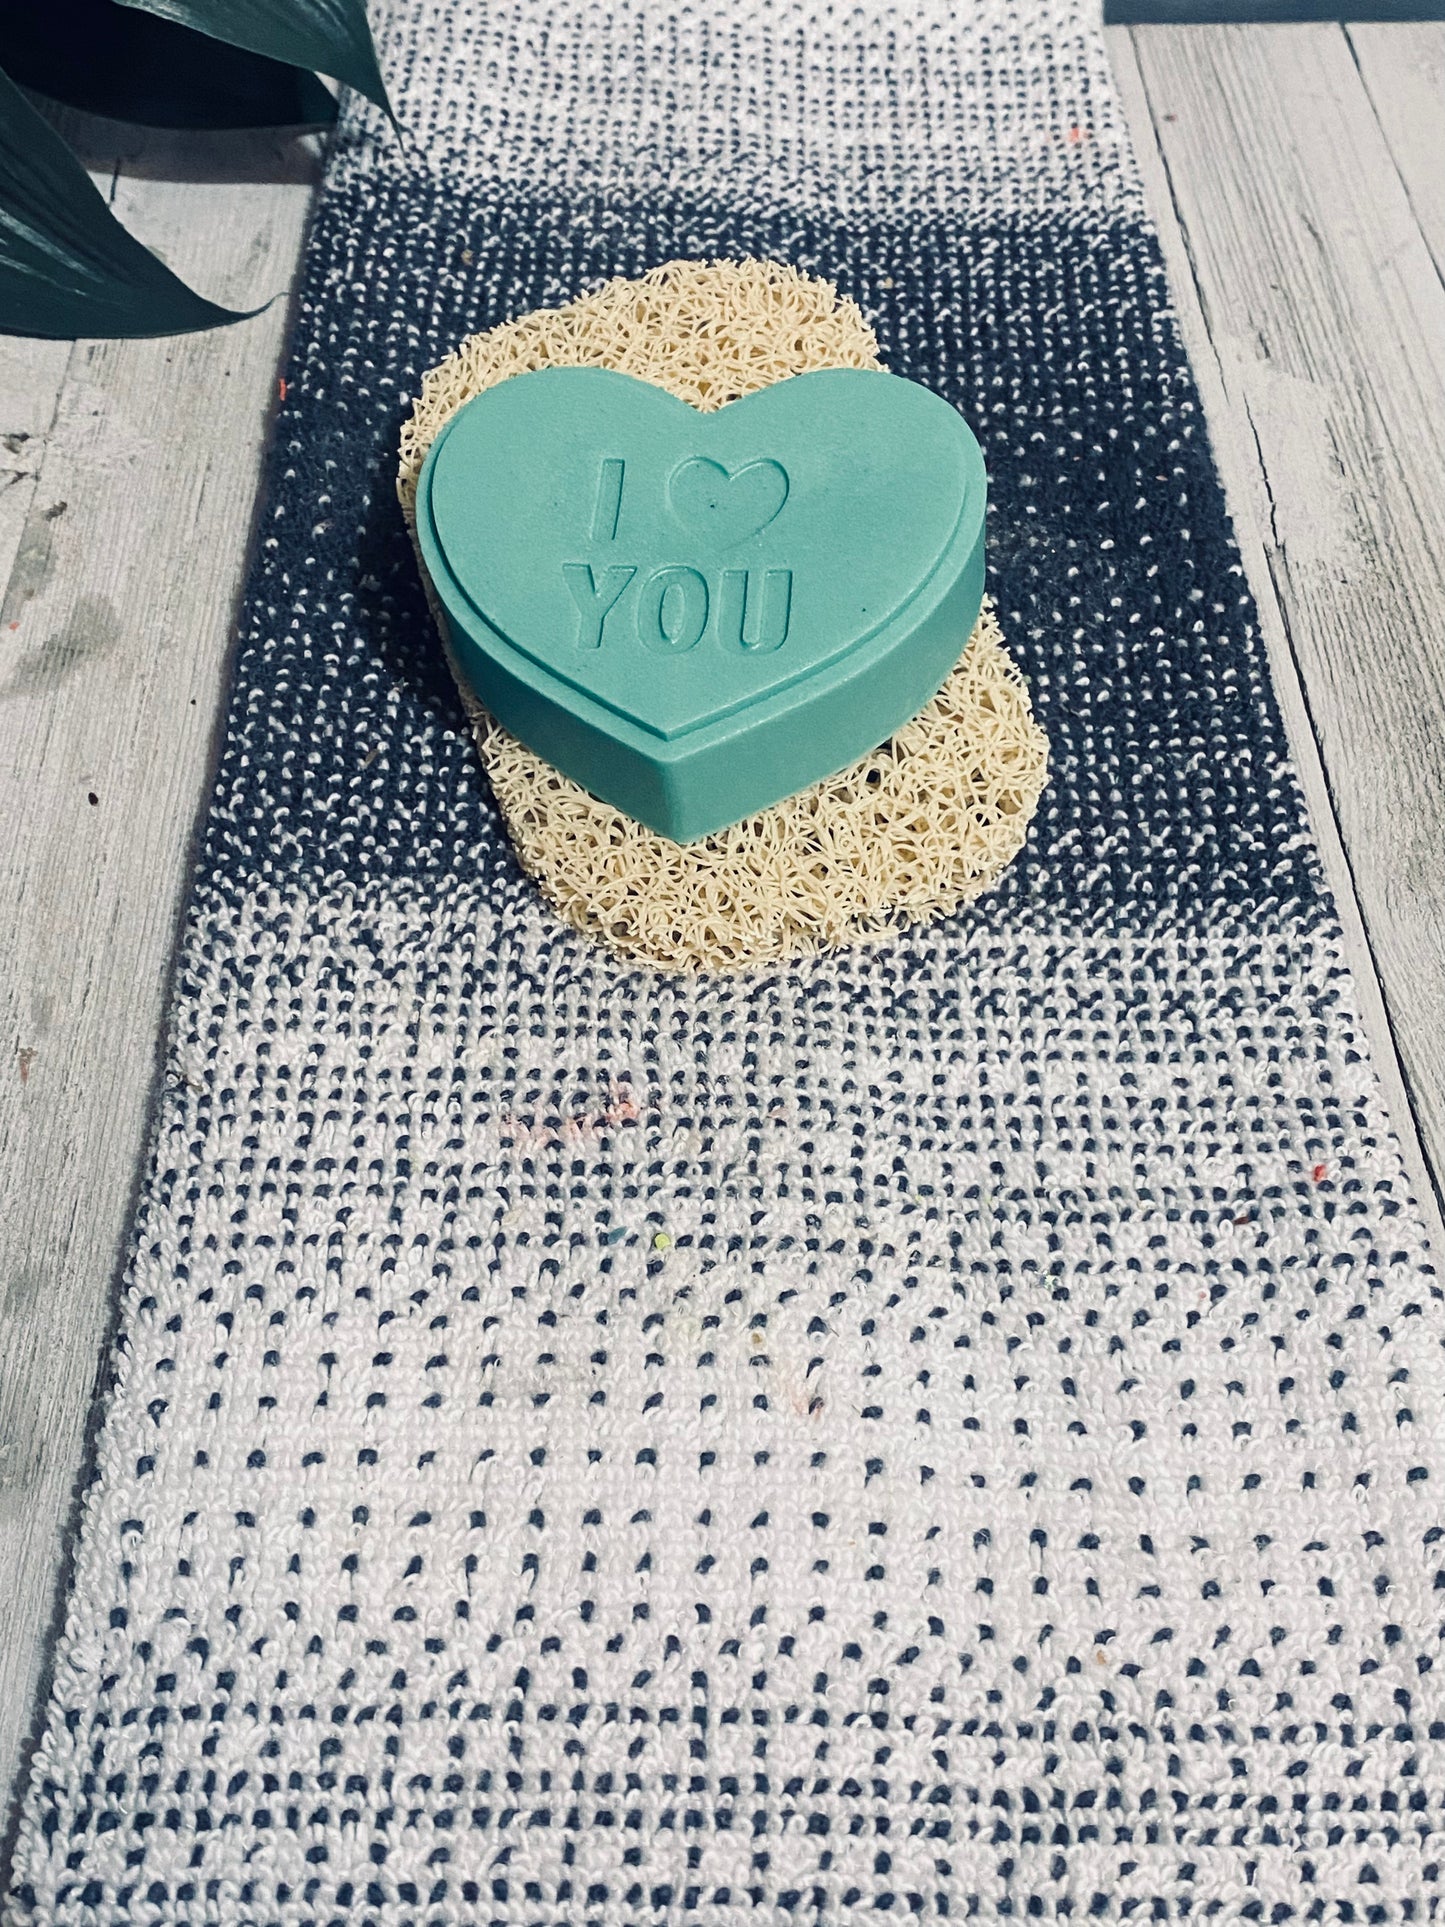 Candy Heart Soaps